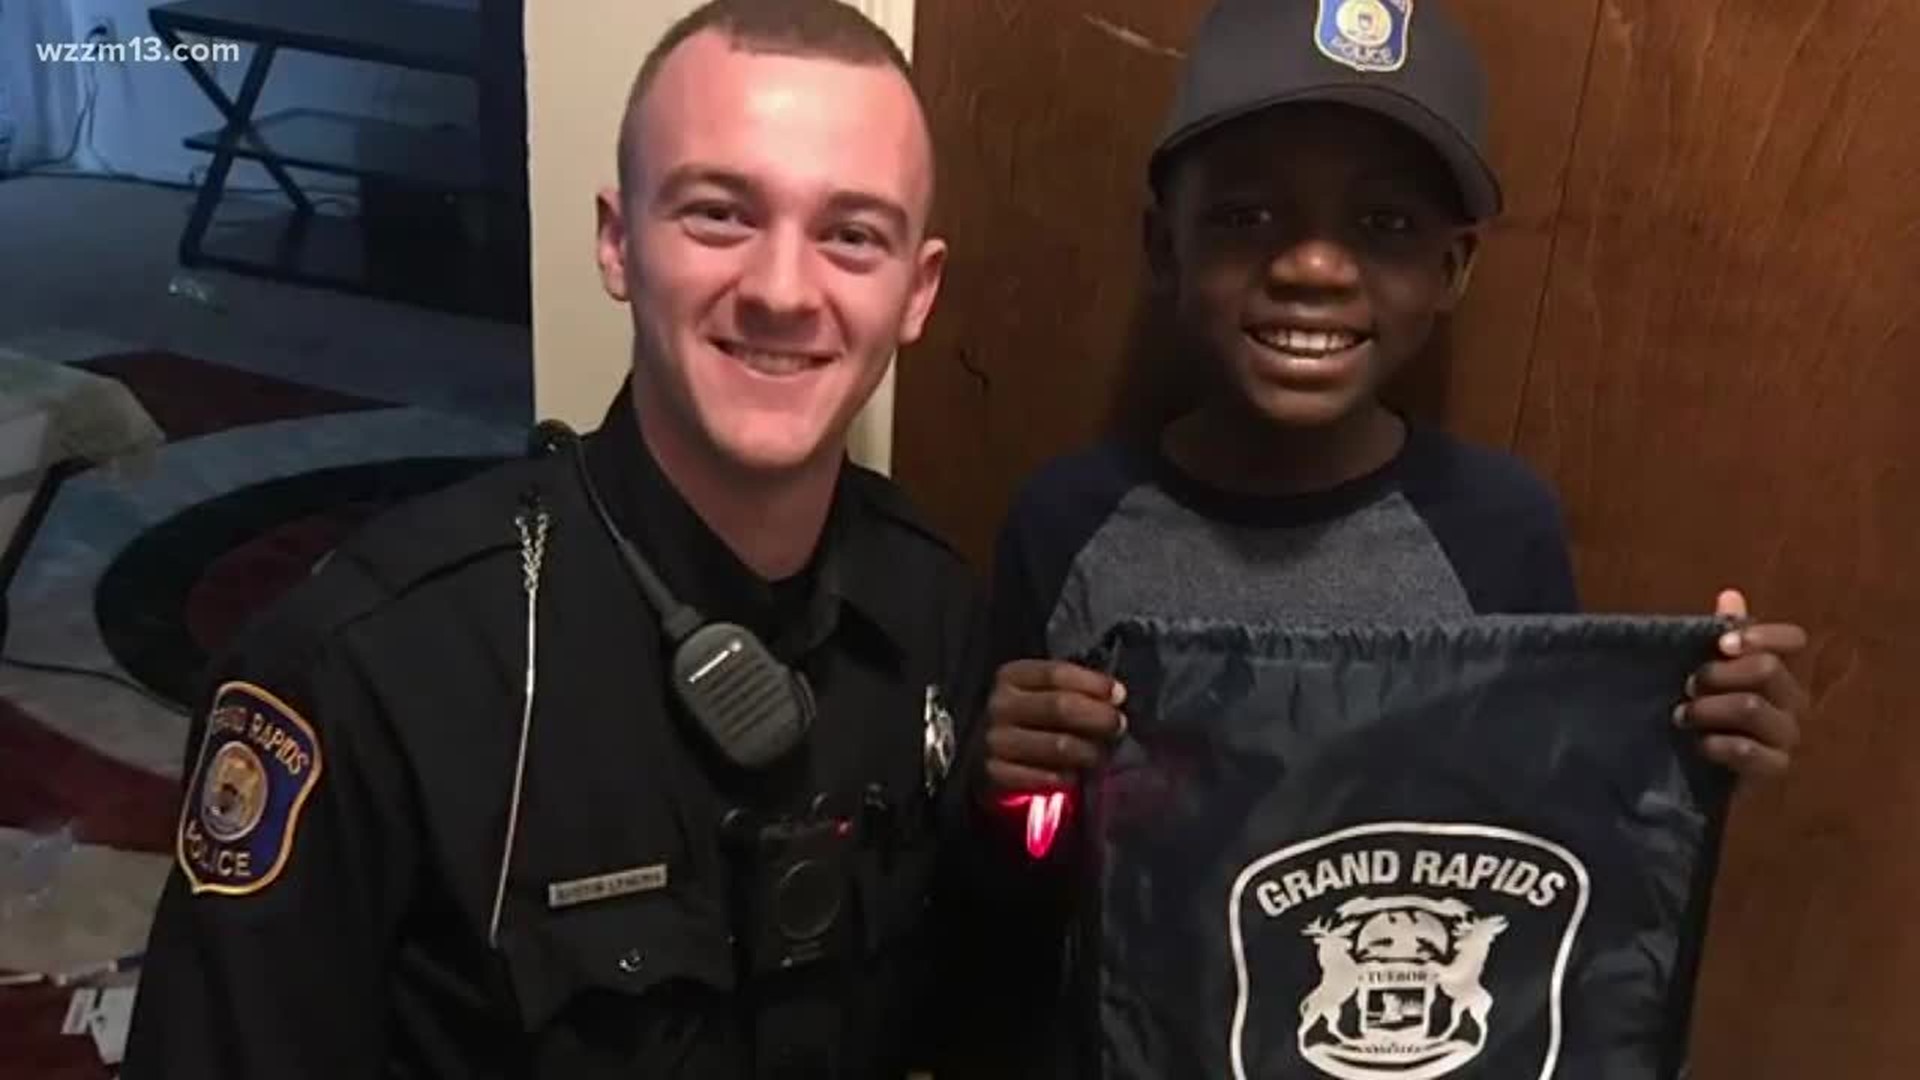 Michigan officers celebrate 9-year-old’s birthday after no one showed up to his party